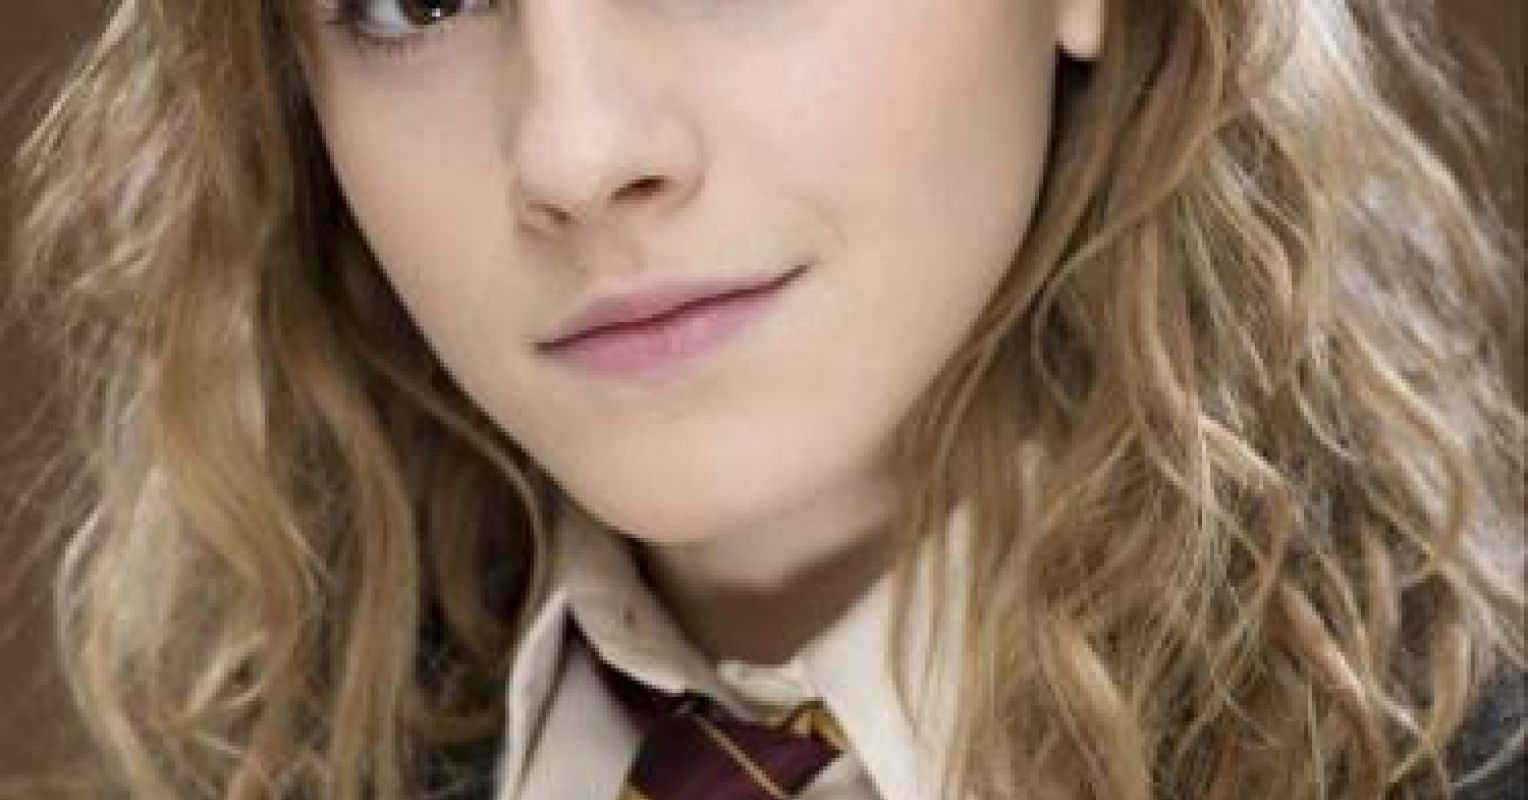 Does the Harry Potter character Hermione Granger have Autism or ADHD?